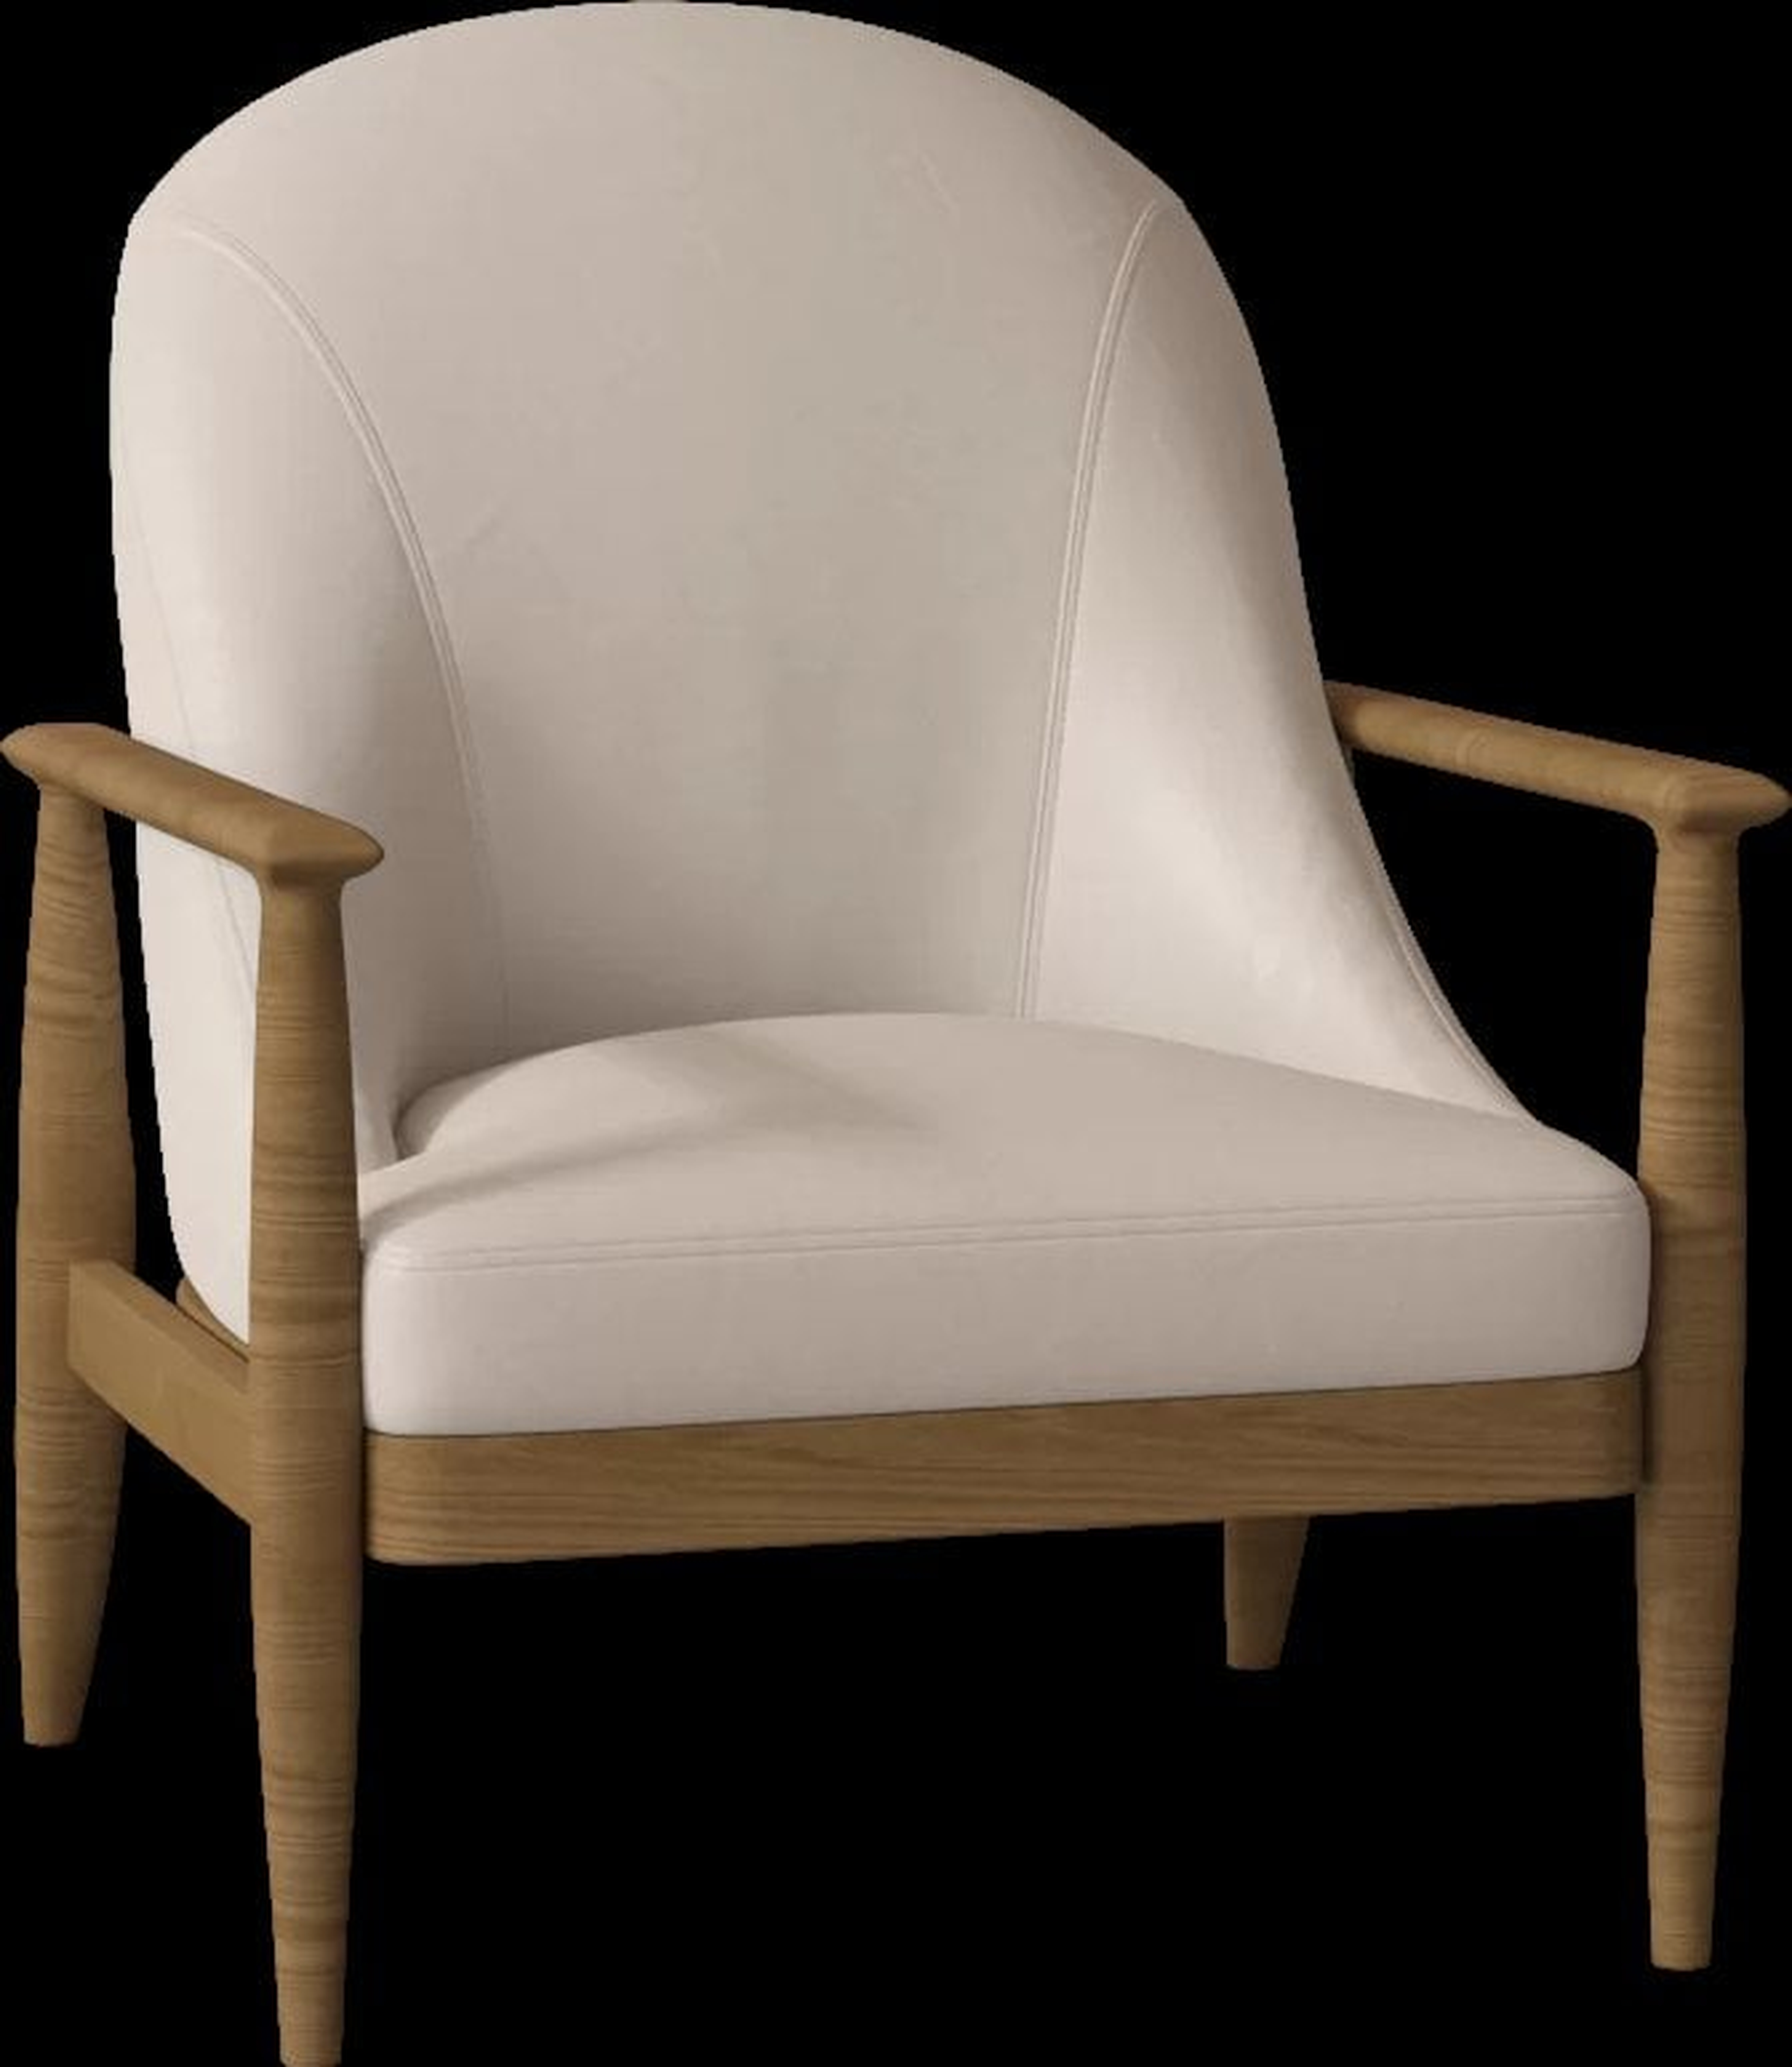 Maria Yee Elena Armchair Body Fabric: Heritage Sand Leather, Leg Color: Chestnut Ginger - Perigold